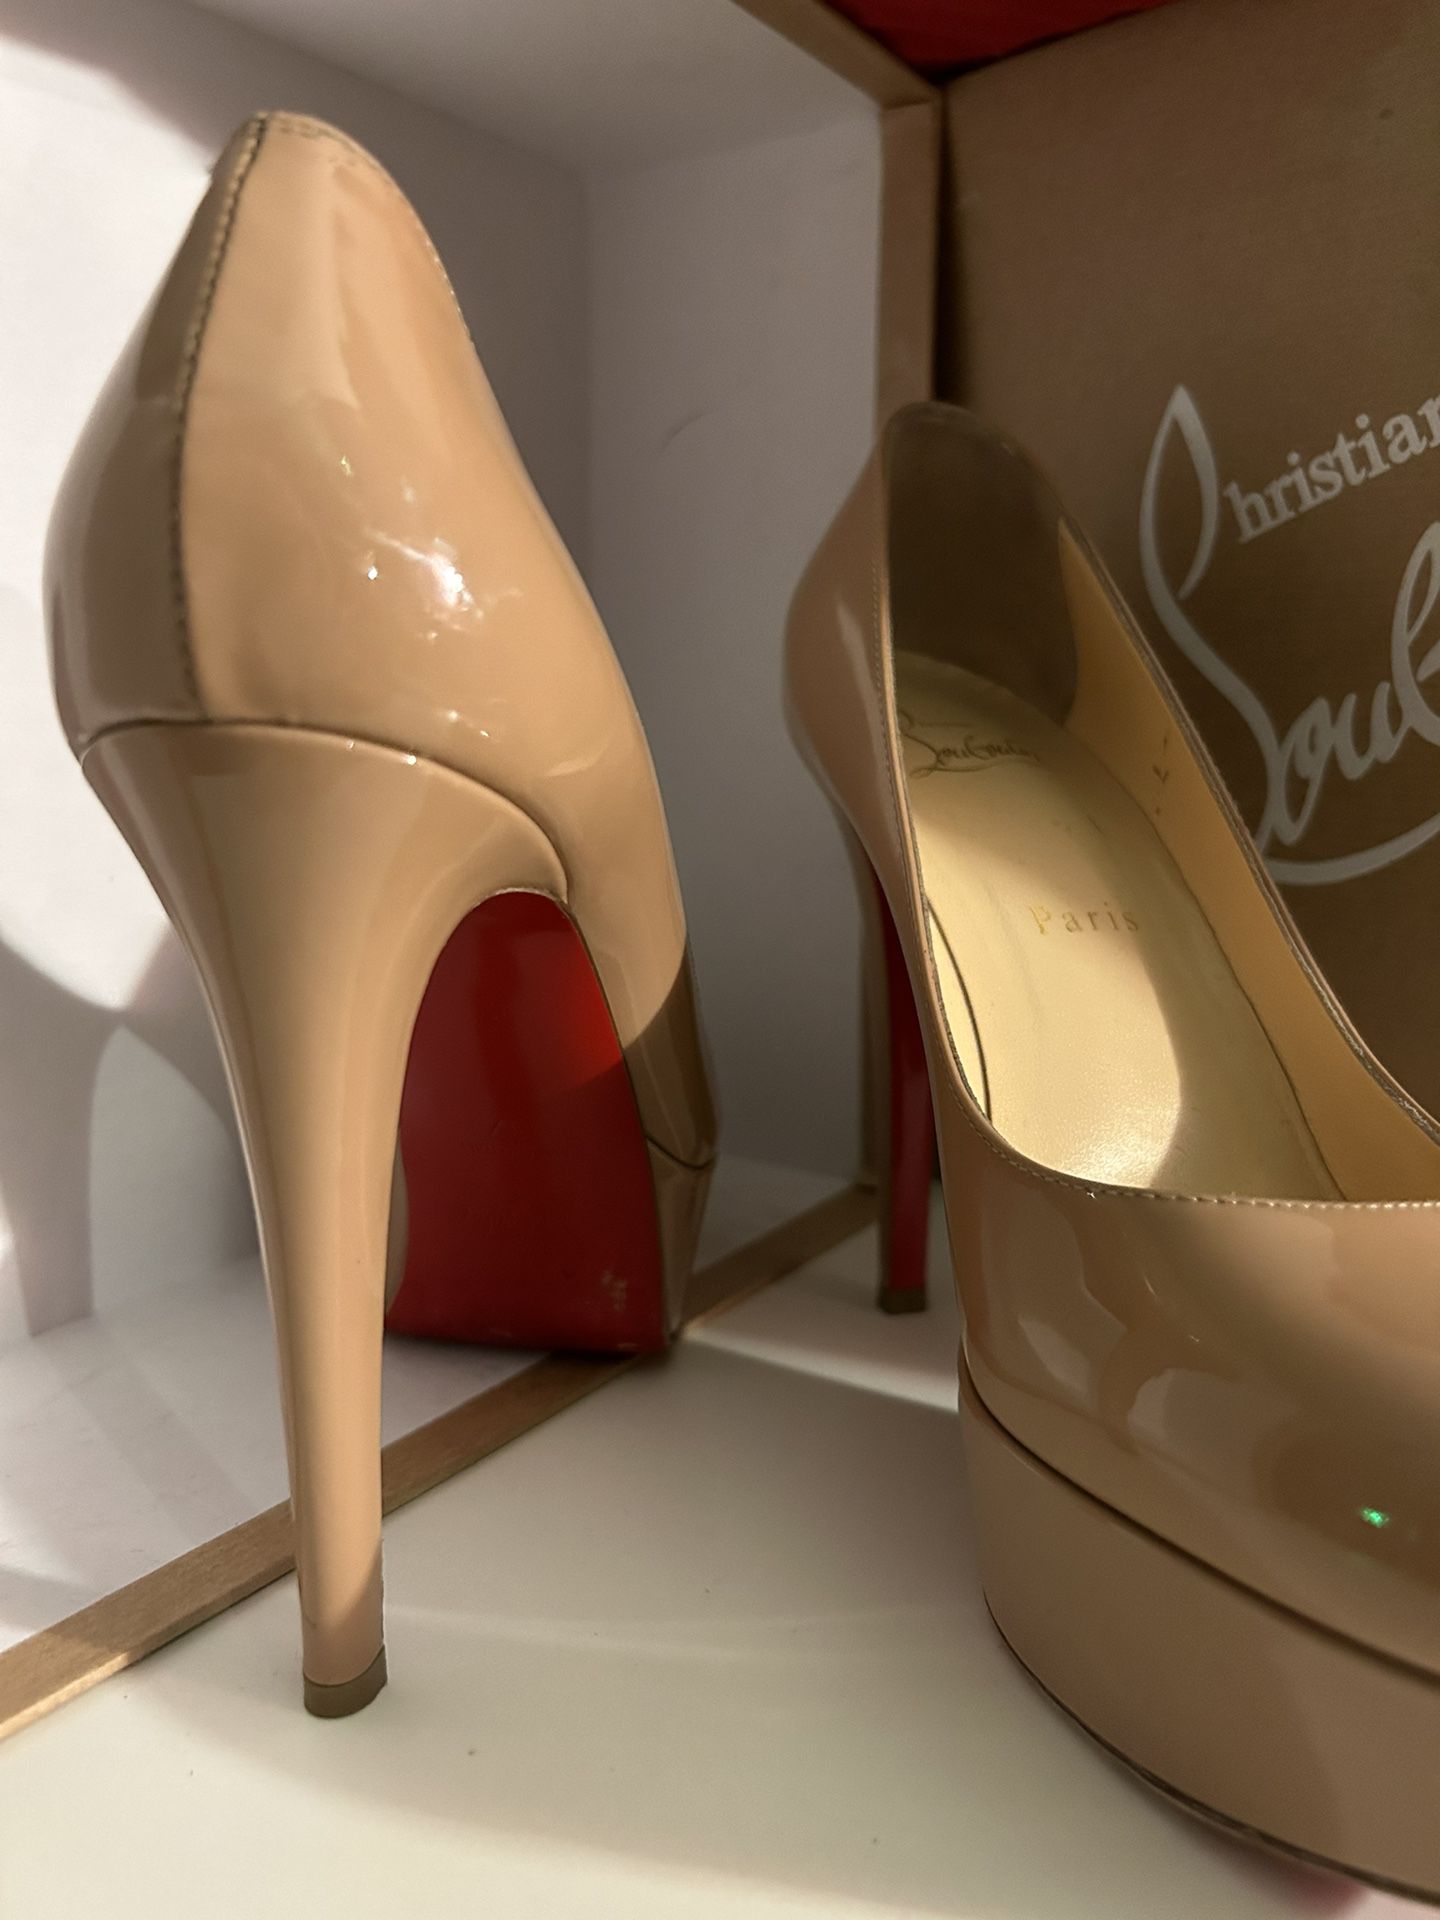 Christian Louboutin  “Red Bottoms” “ Bloody Shoes”